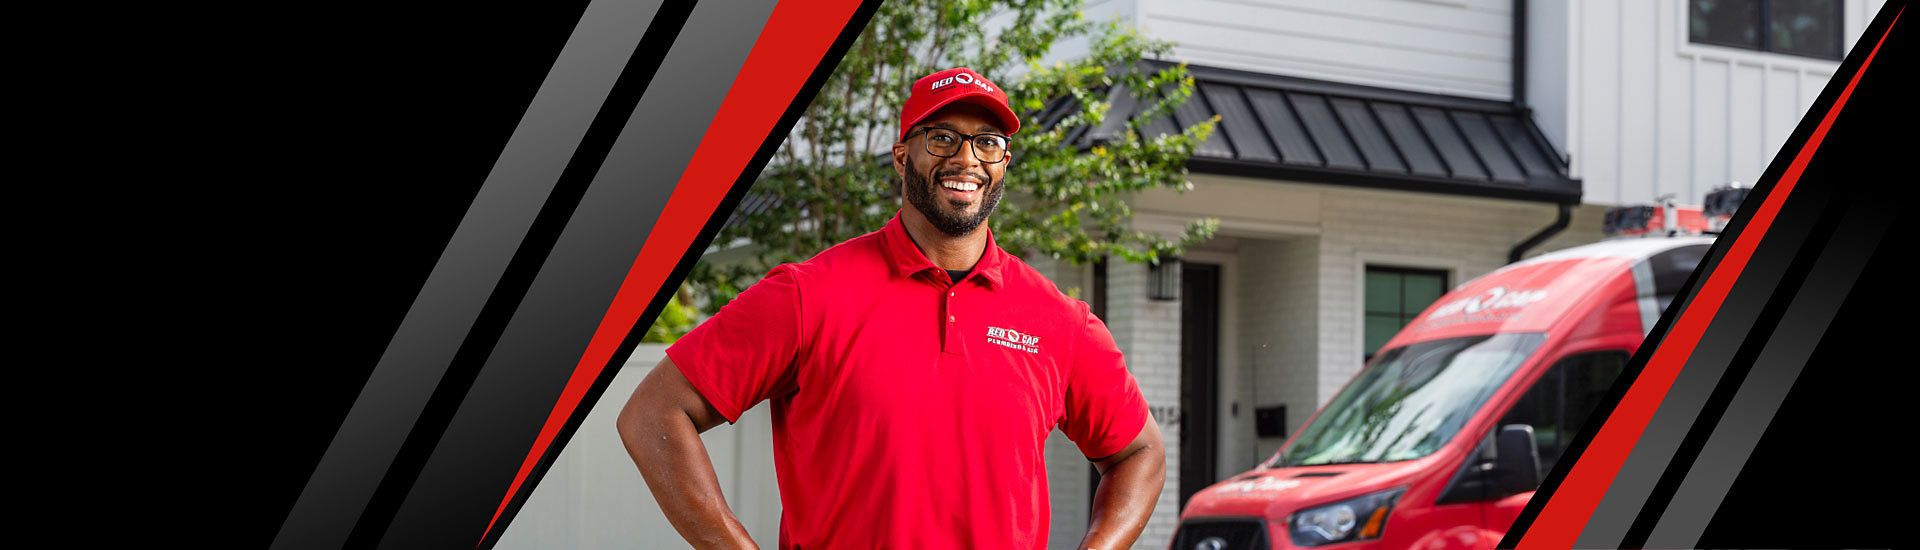 A Red Cap plumber smiling in front of a Tampa home